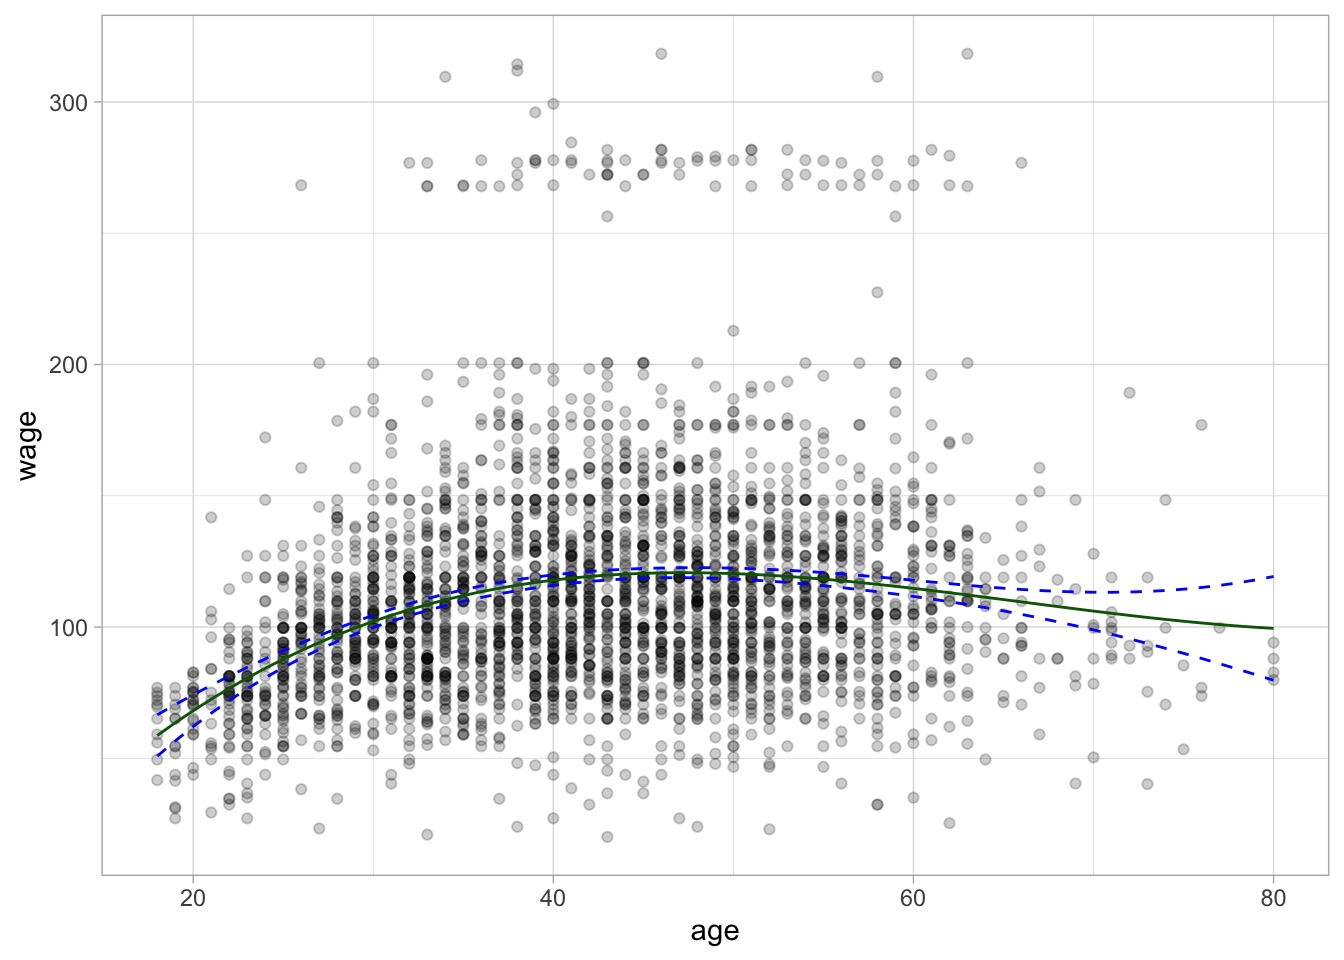 Scatter chart, age against the x-axis and wage against y-axis. Fairly normally distributed around wage == 100, with some another blob around wage == 275. A curve in dark green follows the middle of the data with two dottled curves follows closely around.